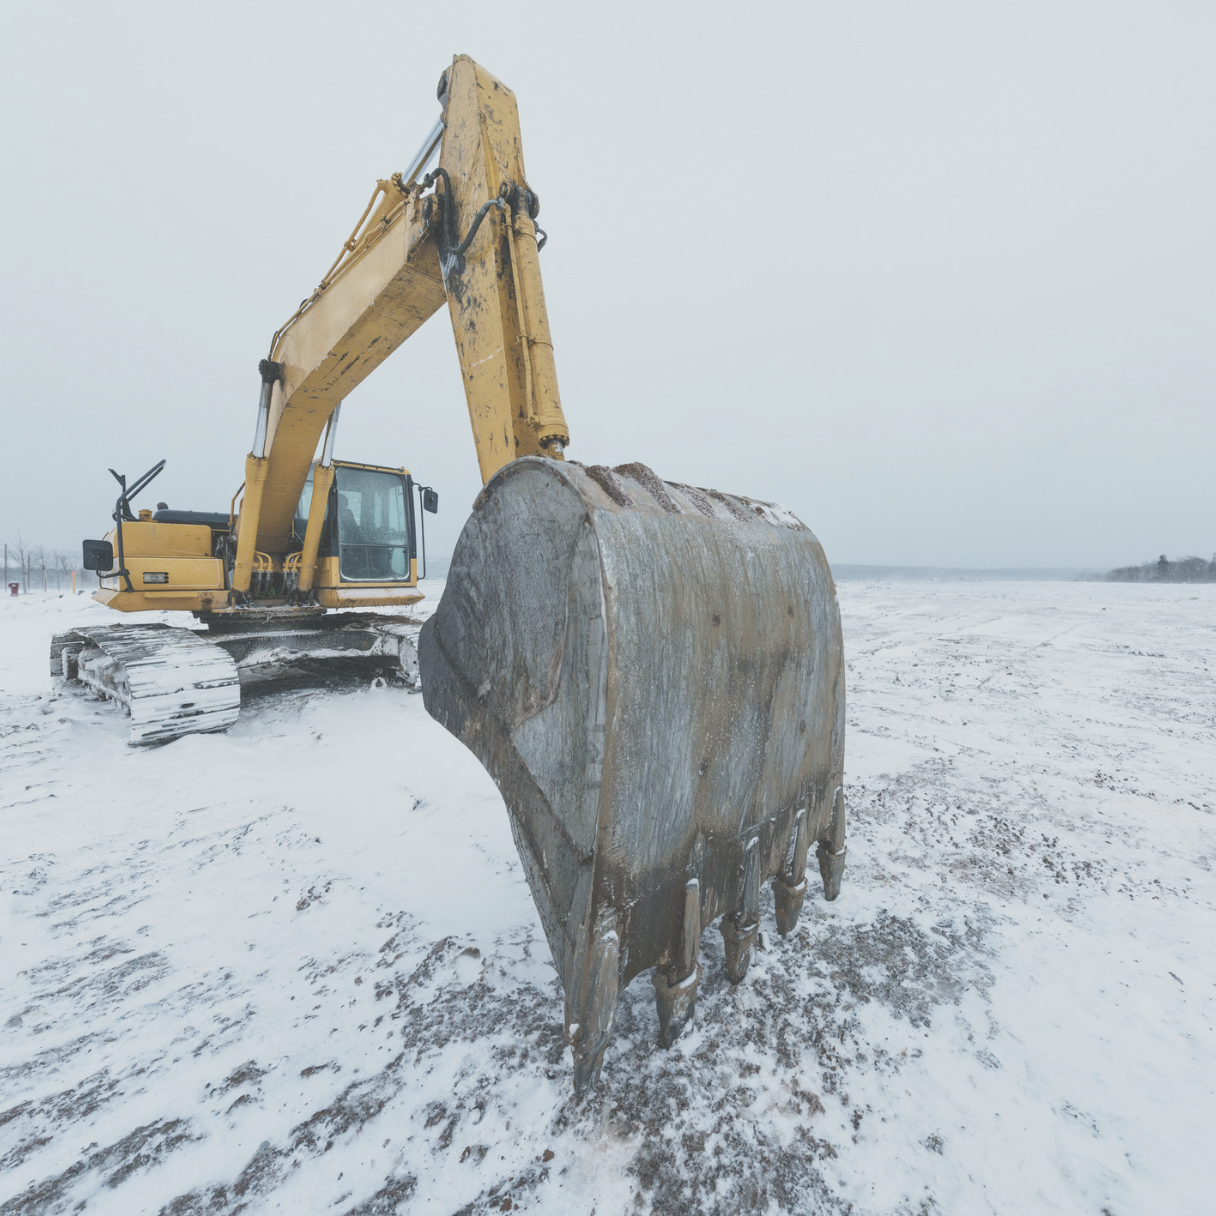 construction equipment in snow to demonstrate winter construction safety